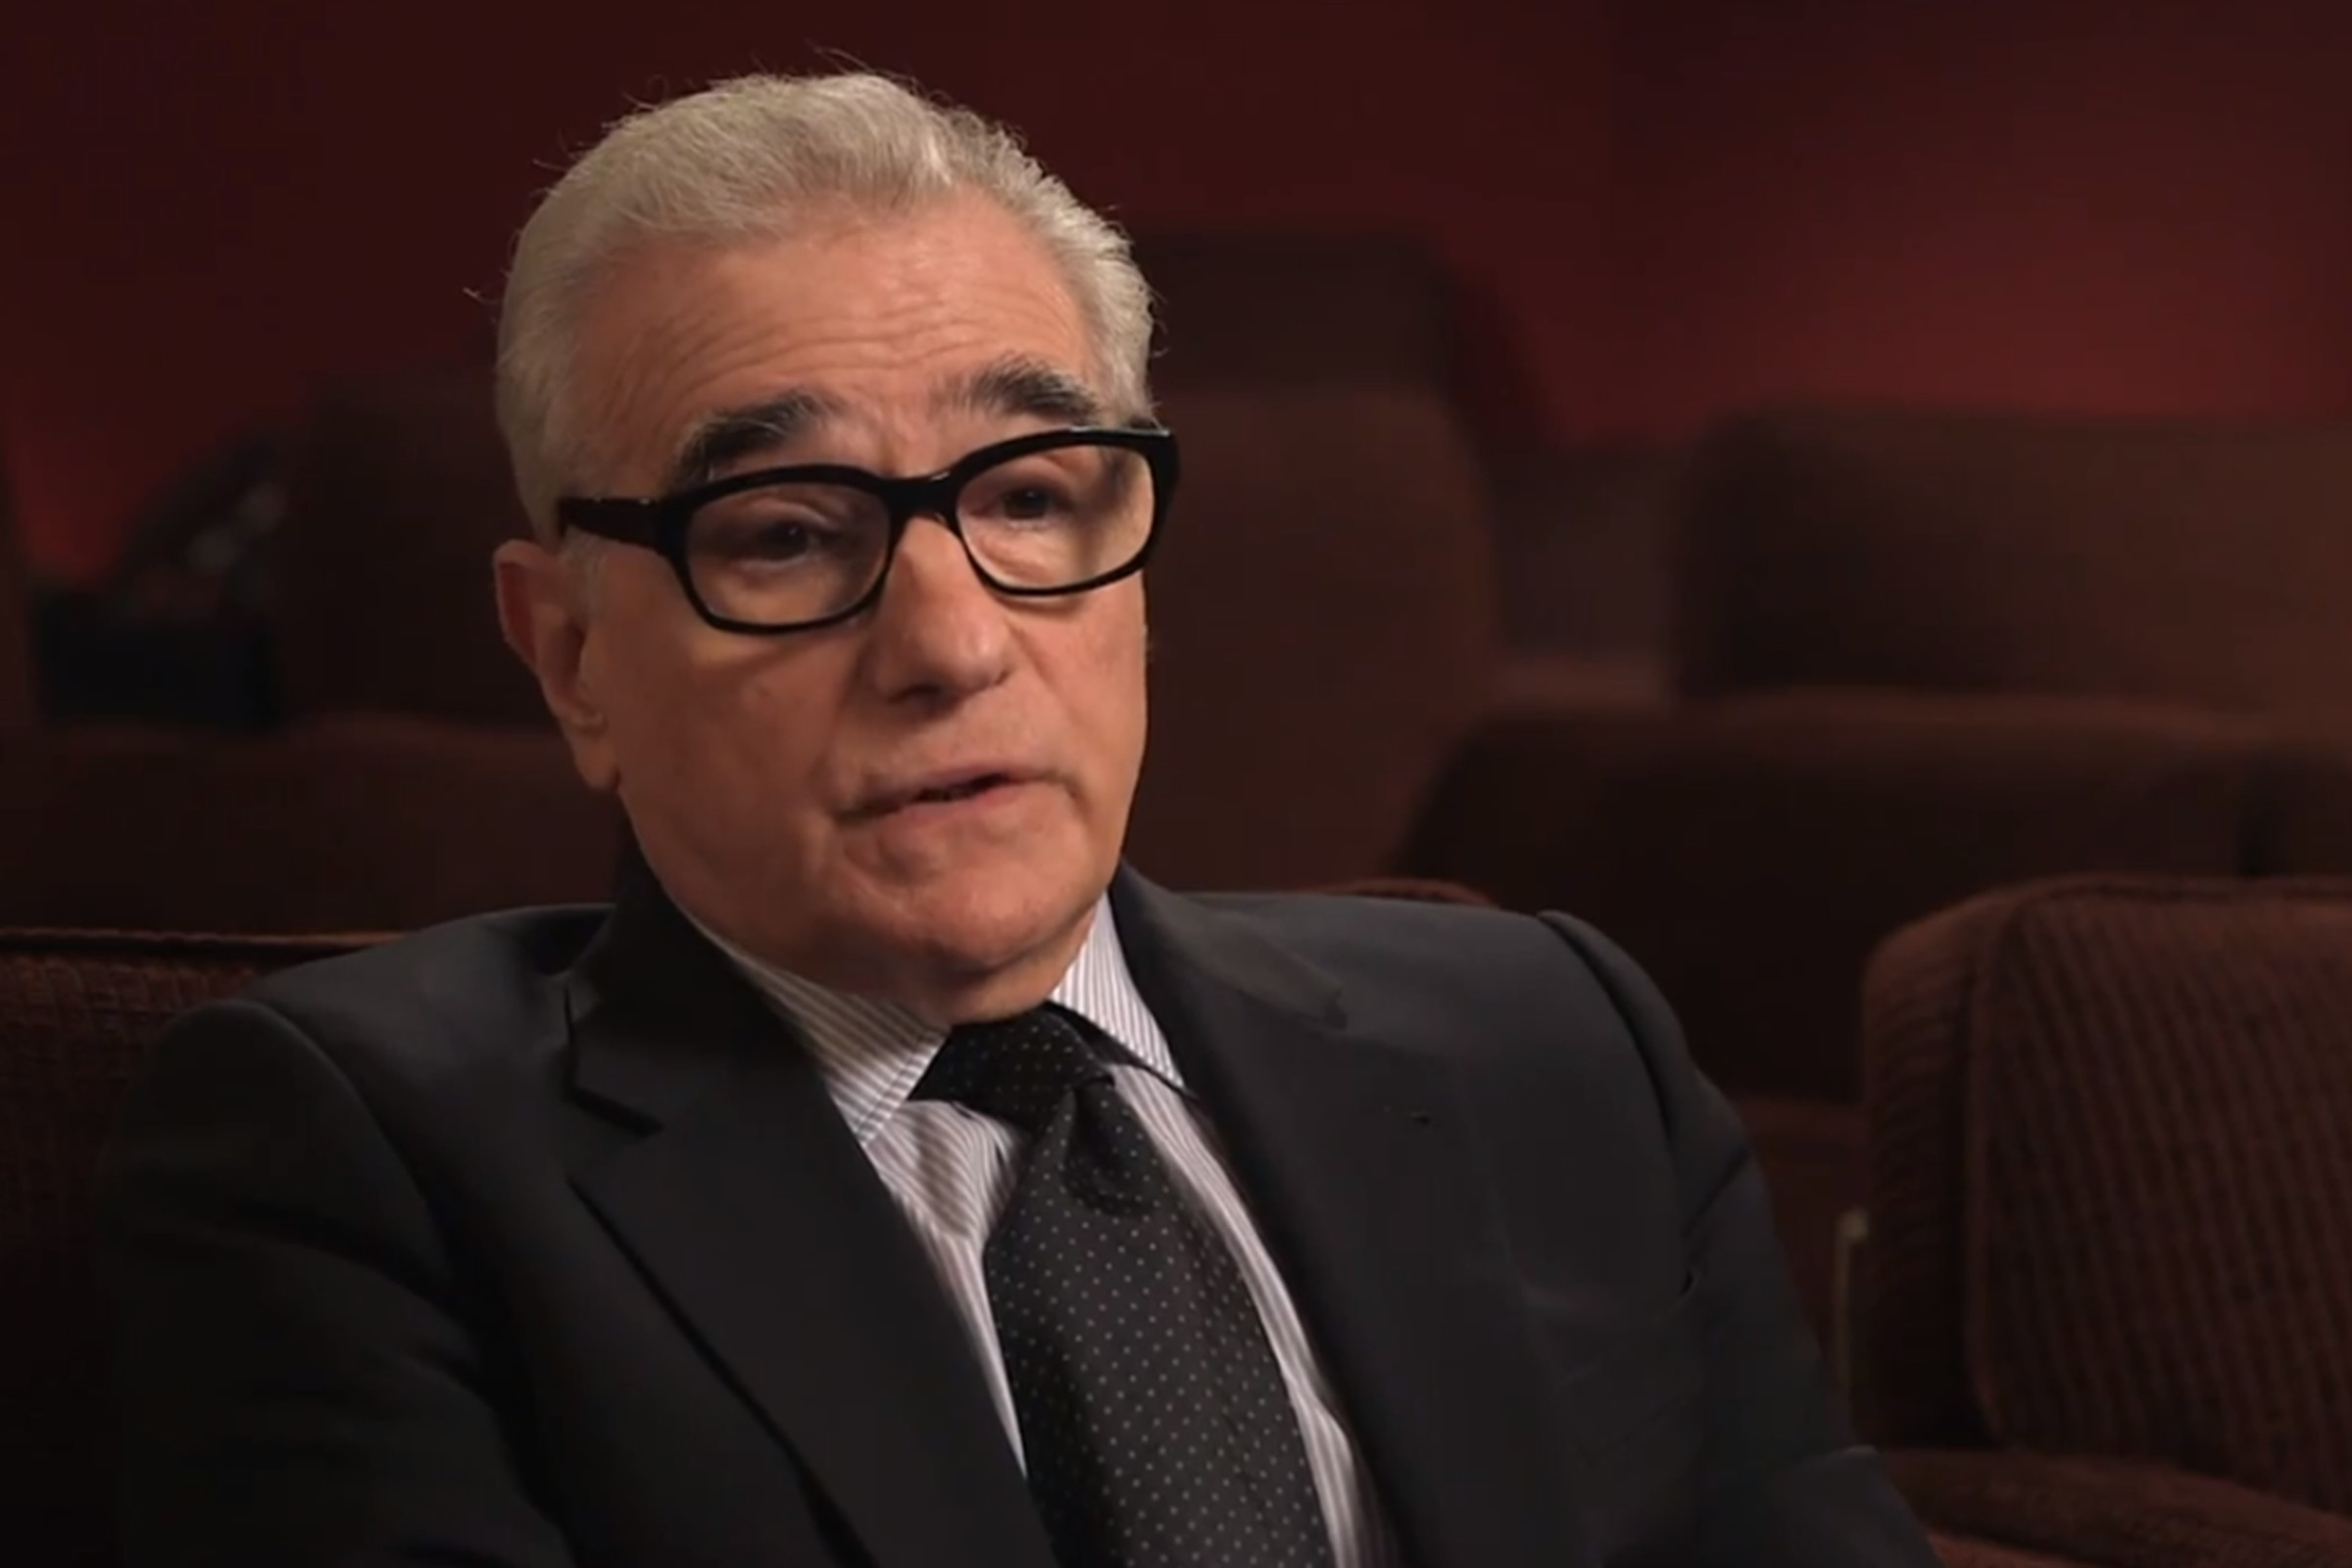 Martin Scorsese (The Criterion Collection)